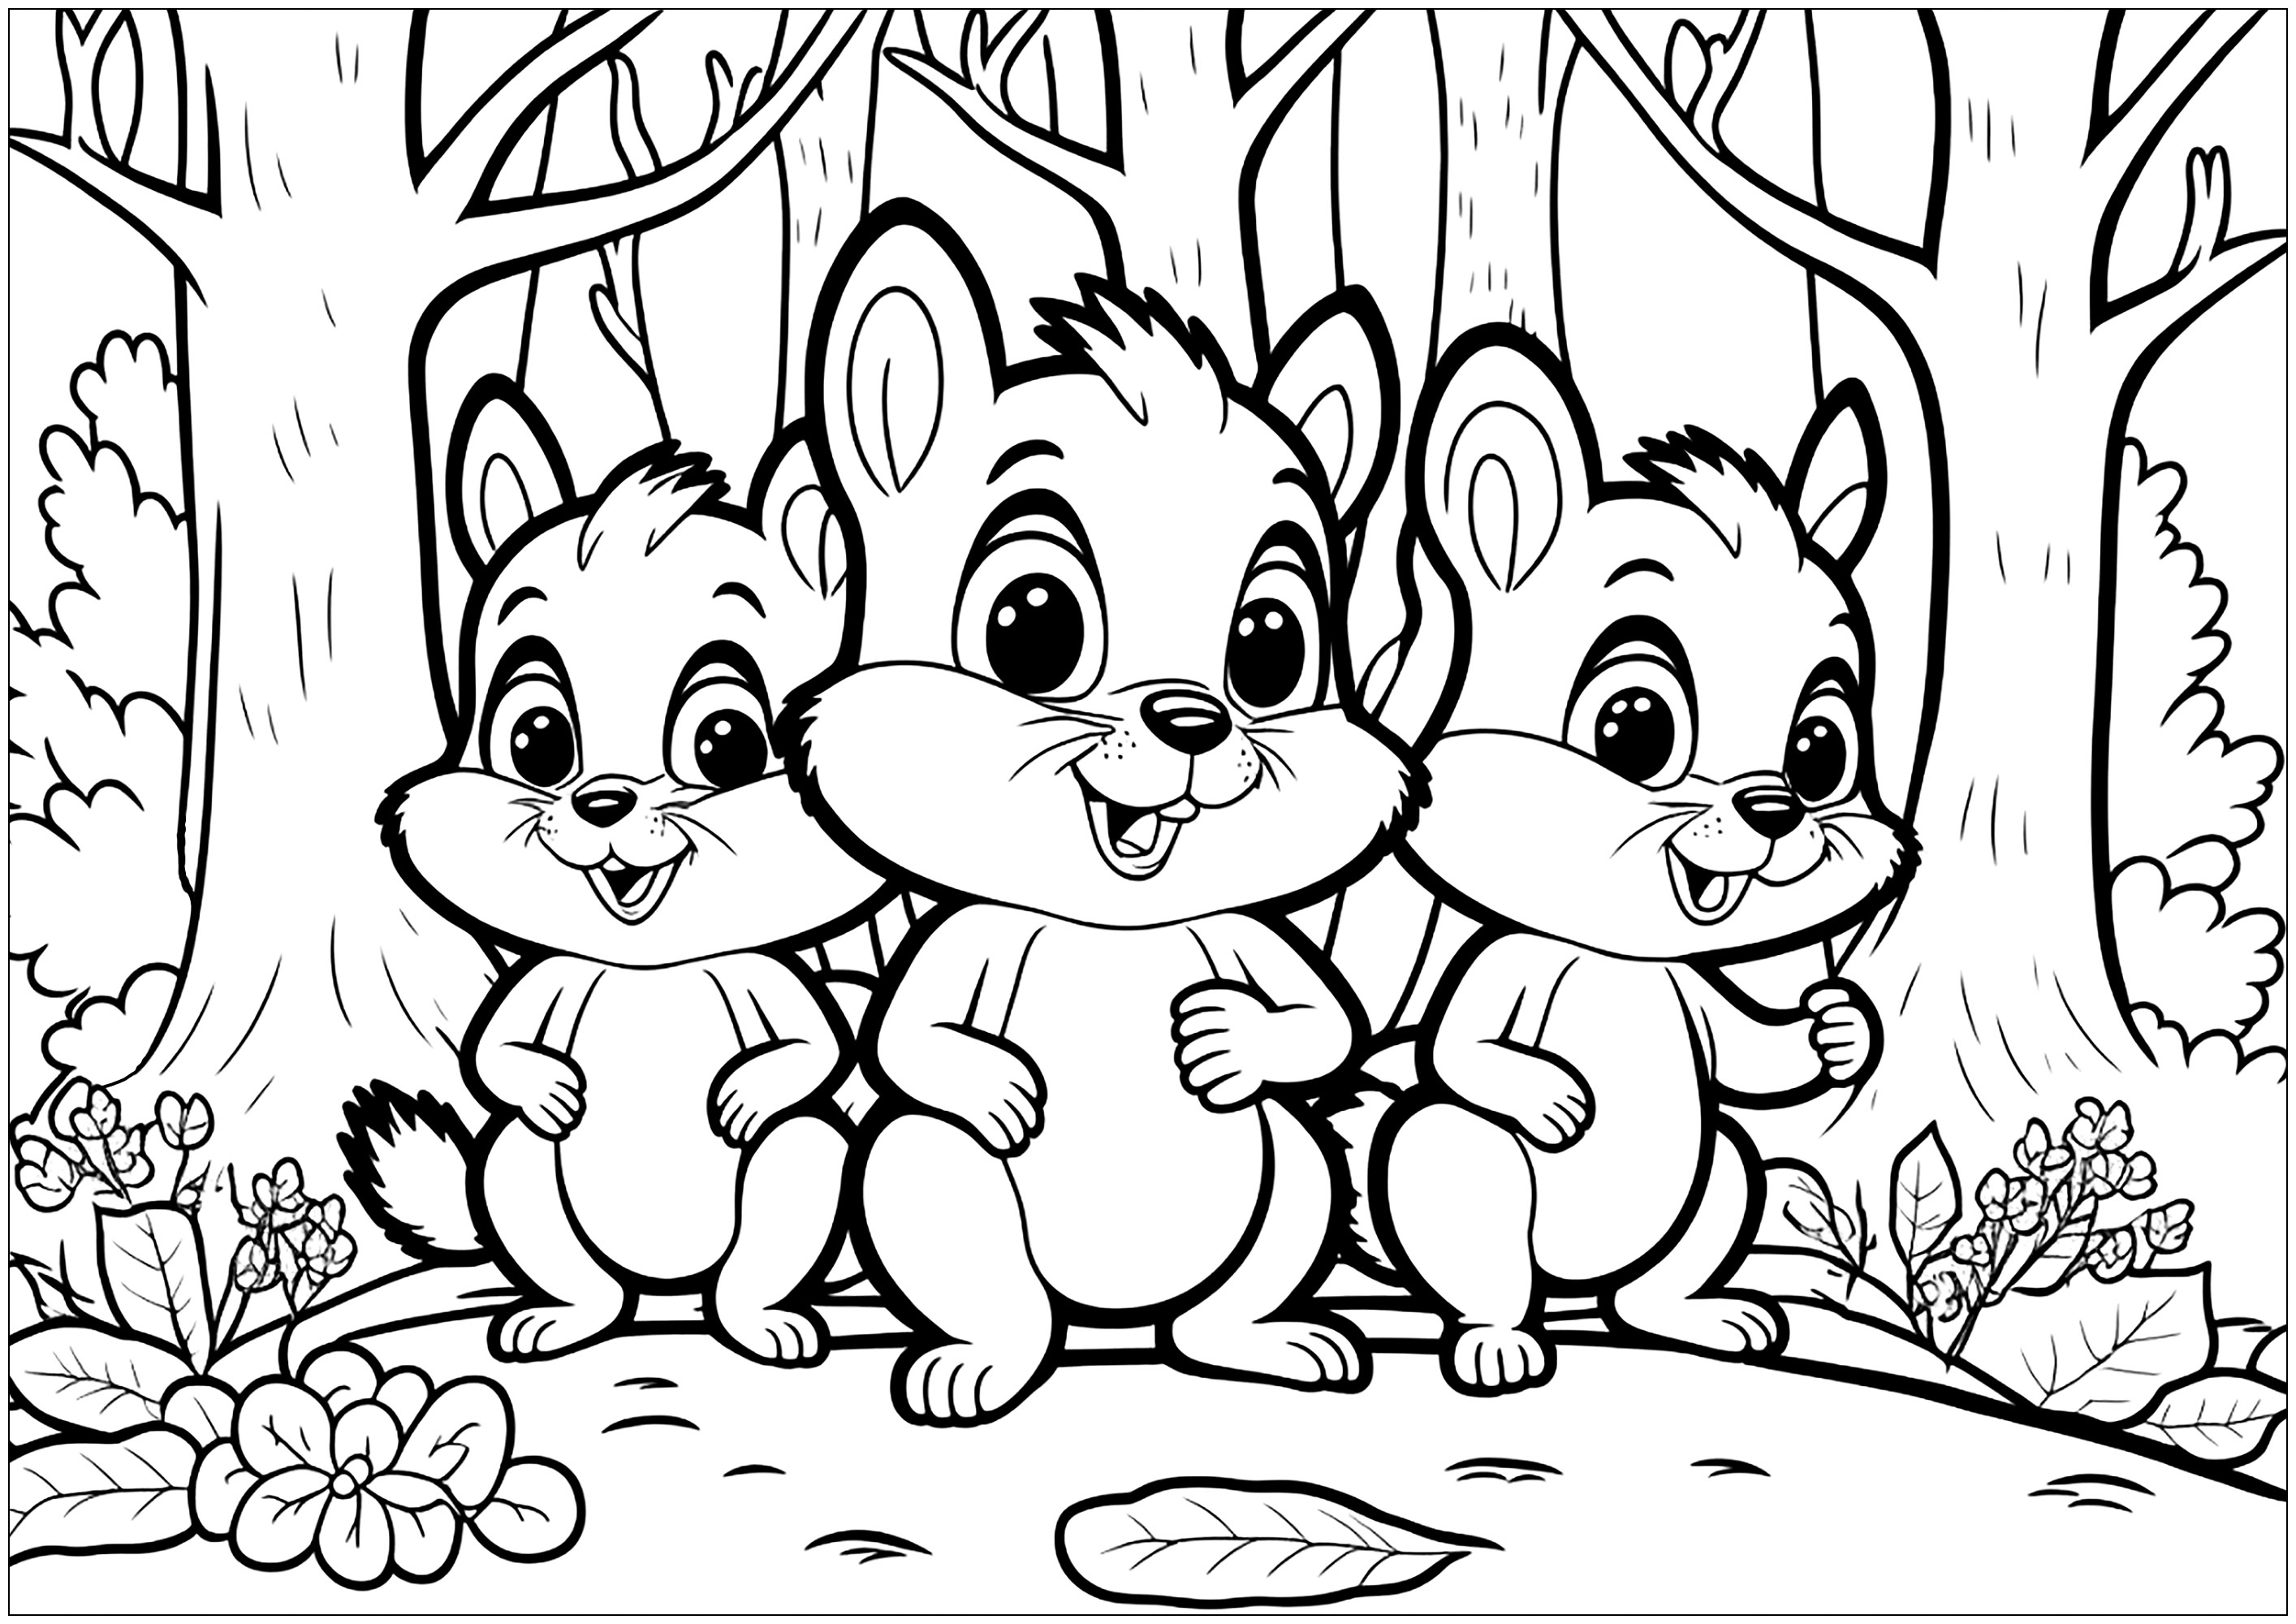 Three nice squirrels in the forest